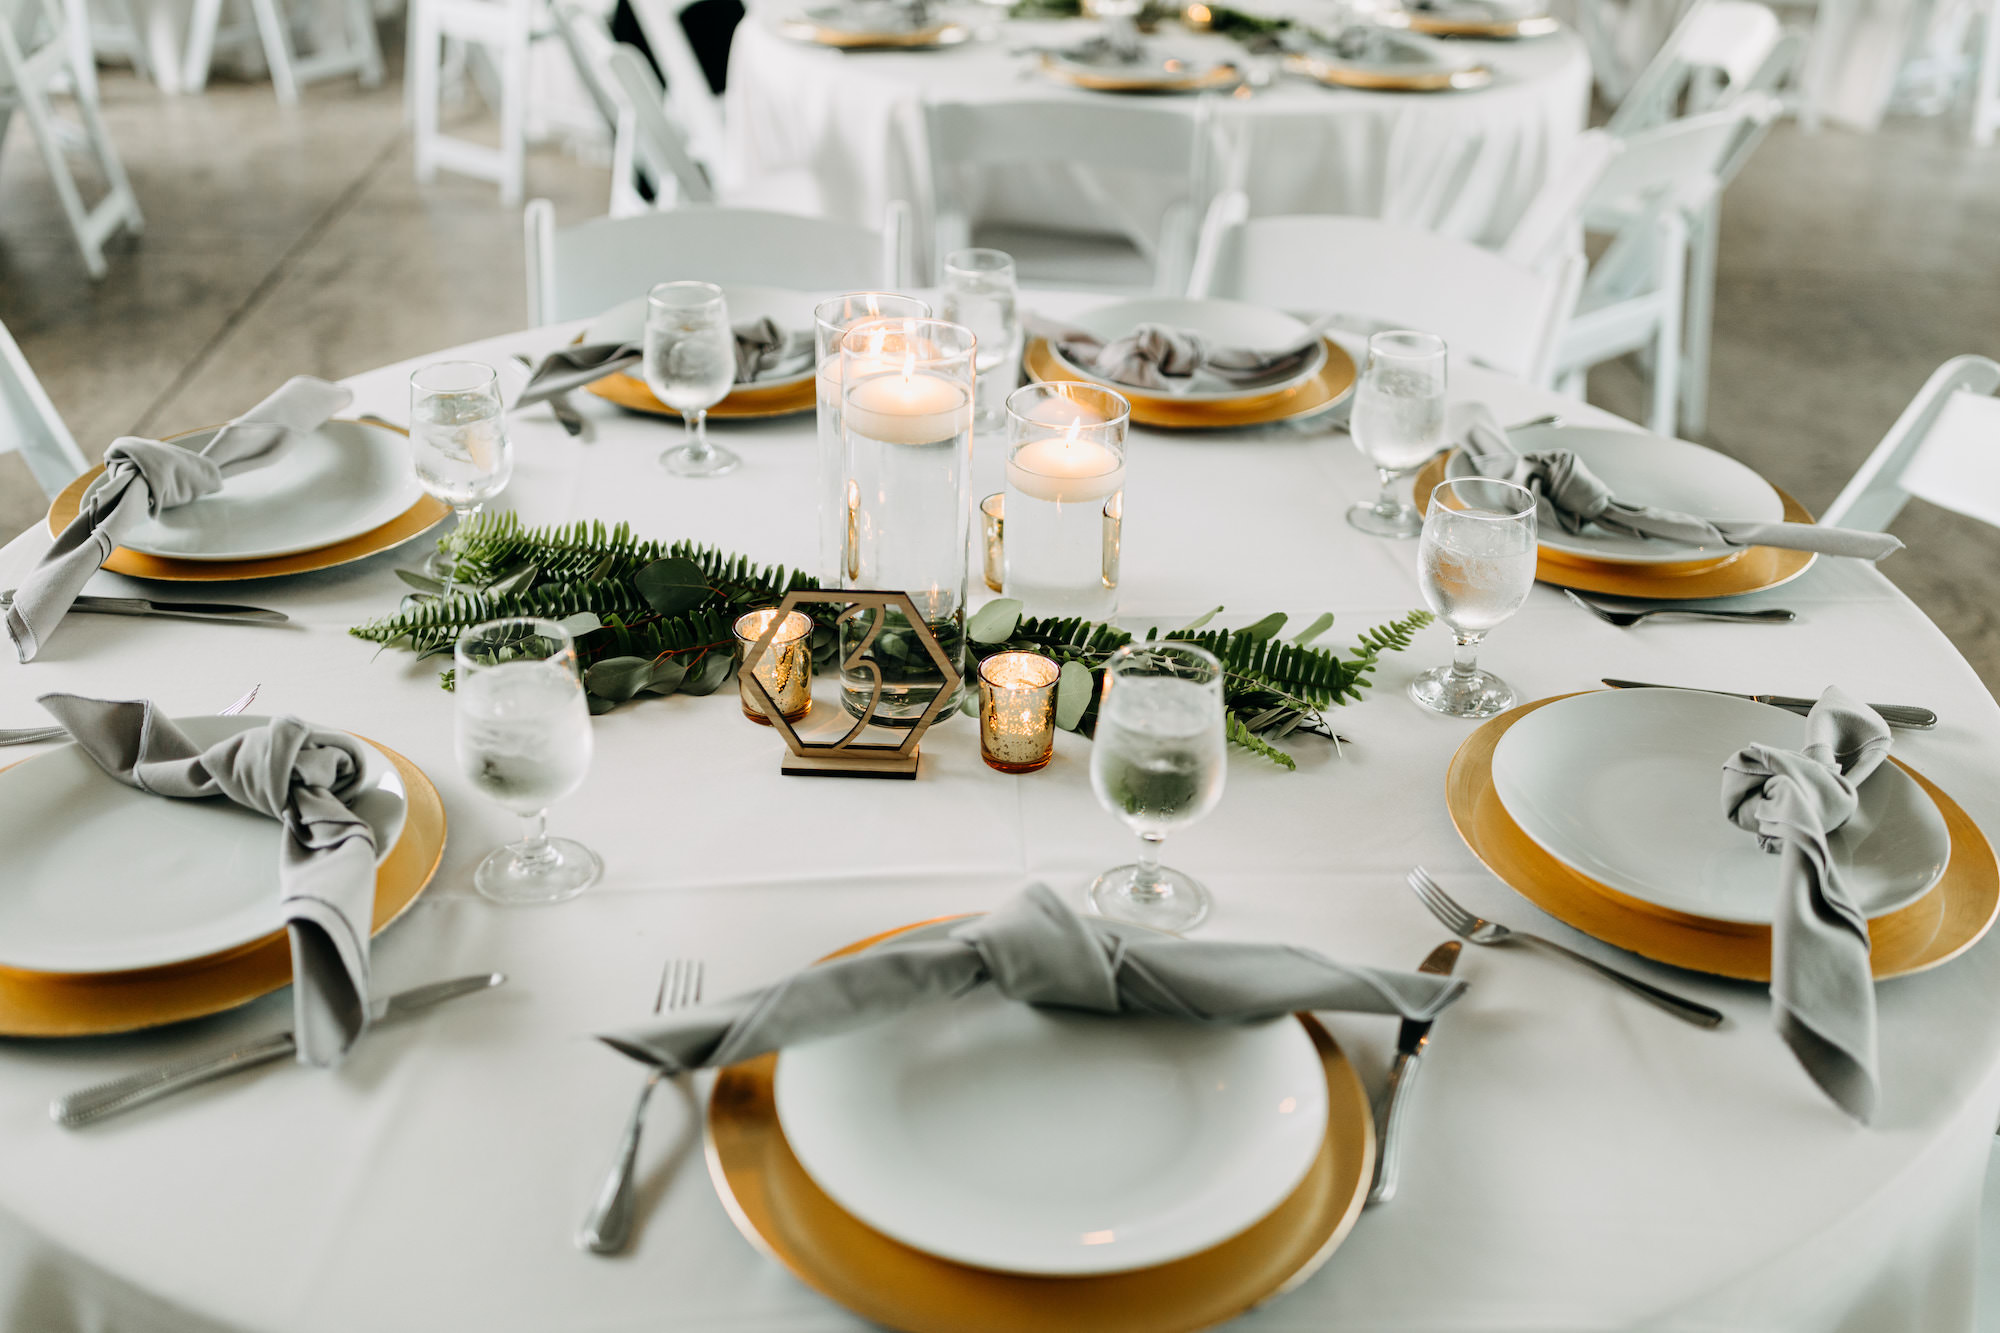 Greenery Centerpiece Inspiration | Gold Chargers with Gray Linens | Mercury Votives and Floating Candles